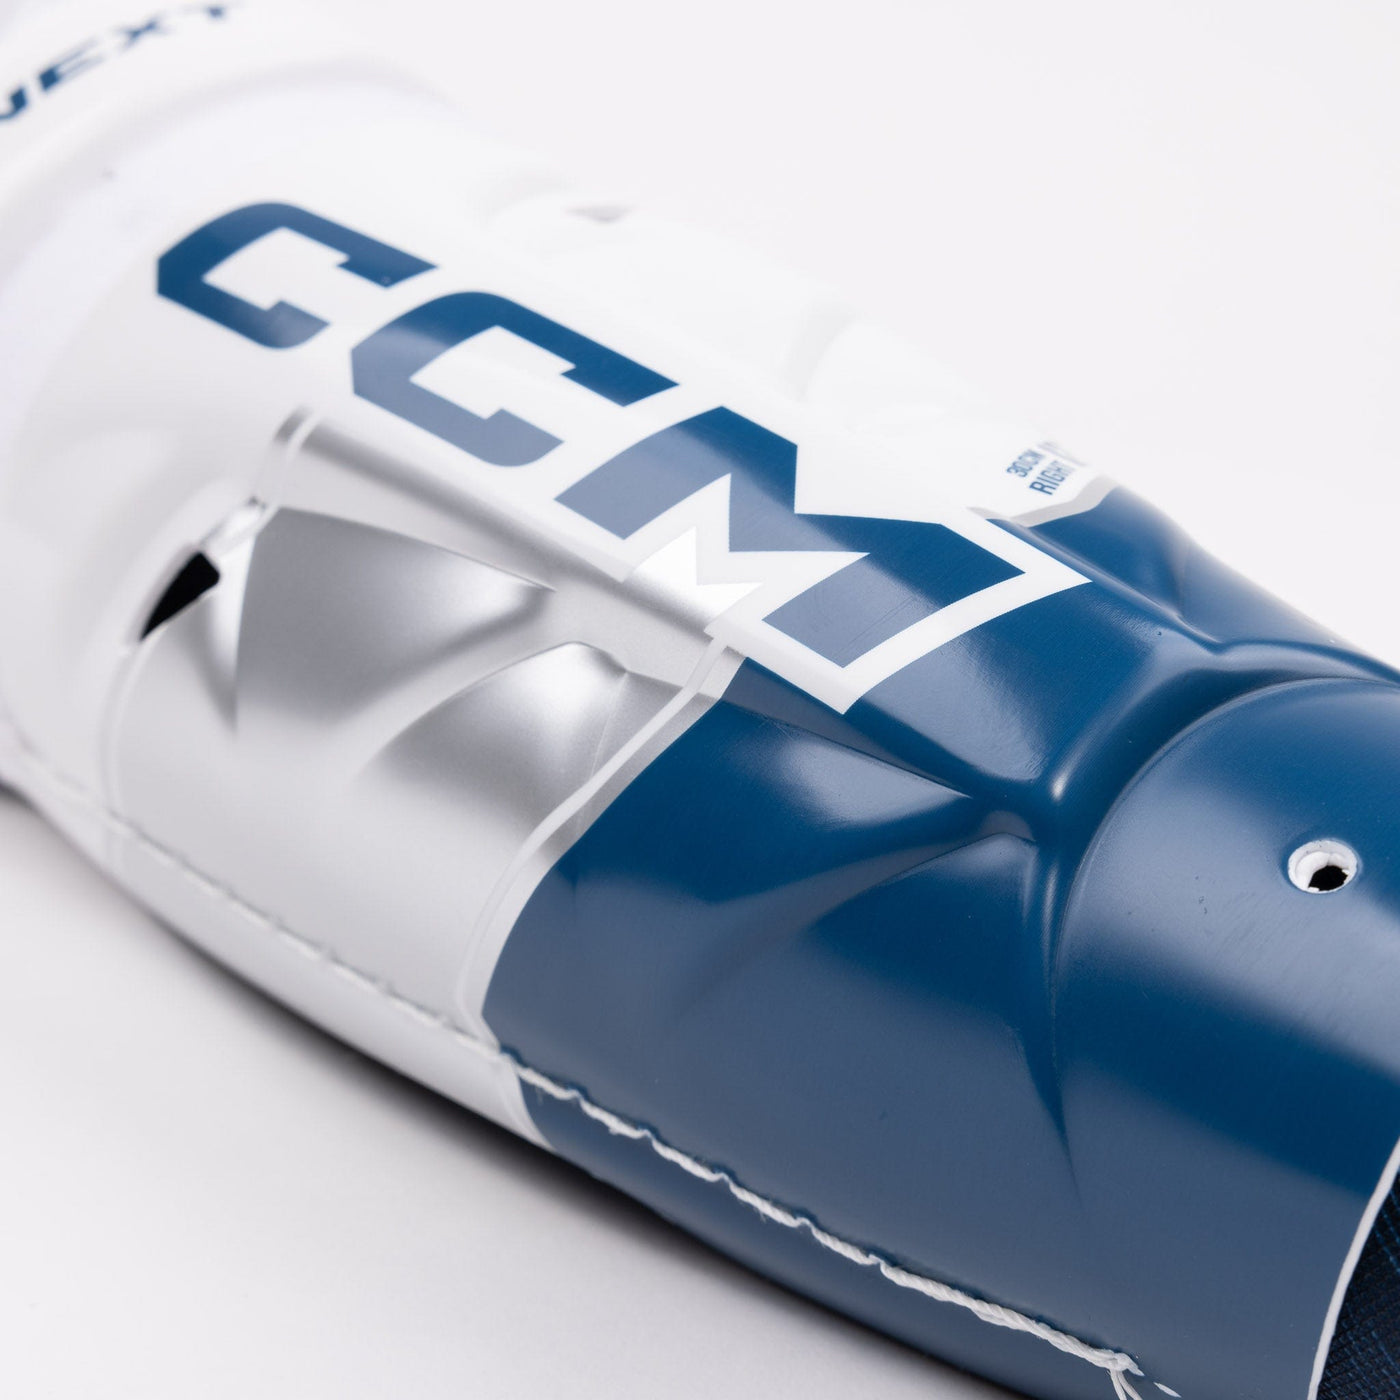 CCM Next Youth Hockey Shin Guards - The Hockey Shop Source For Sports